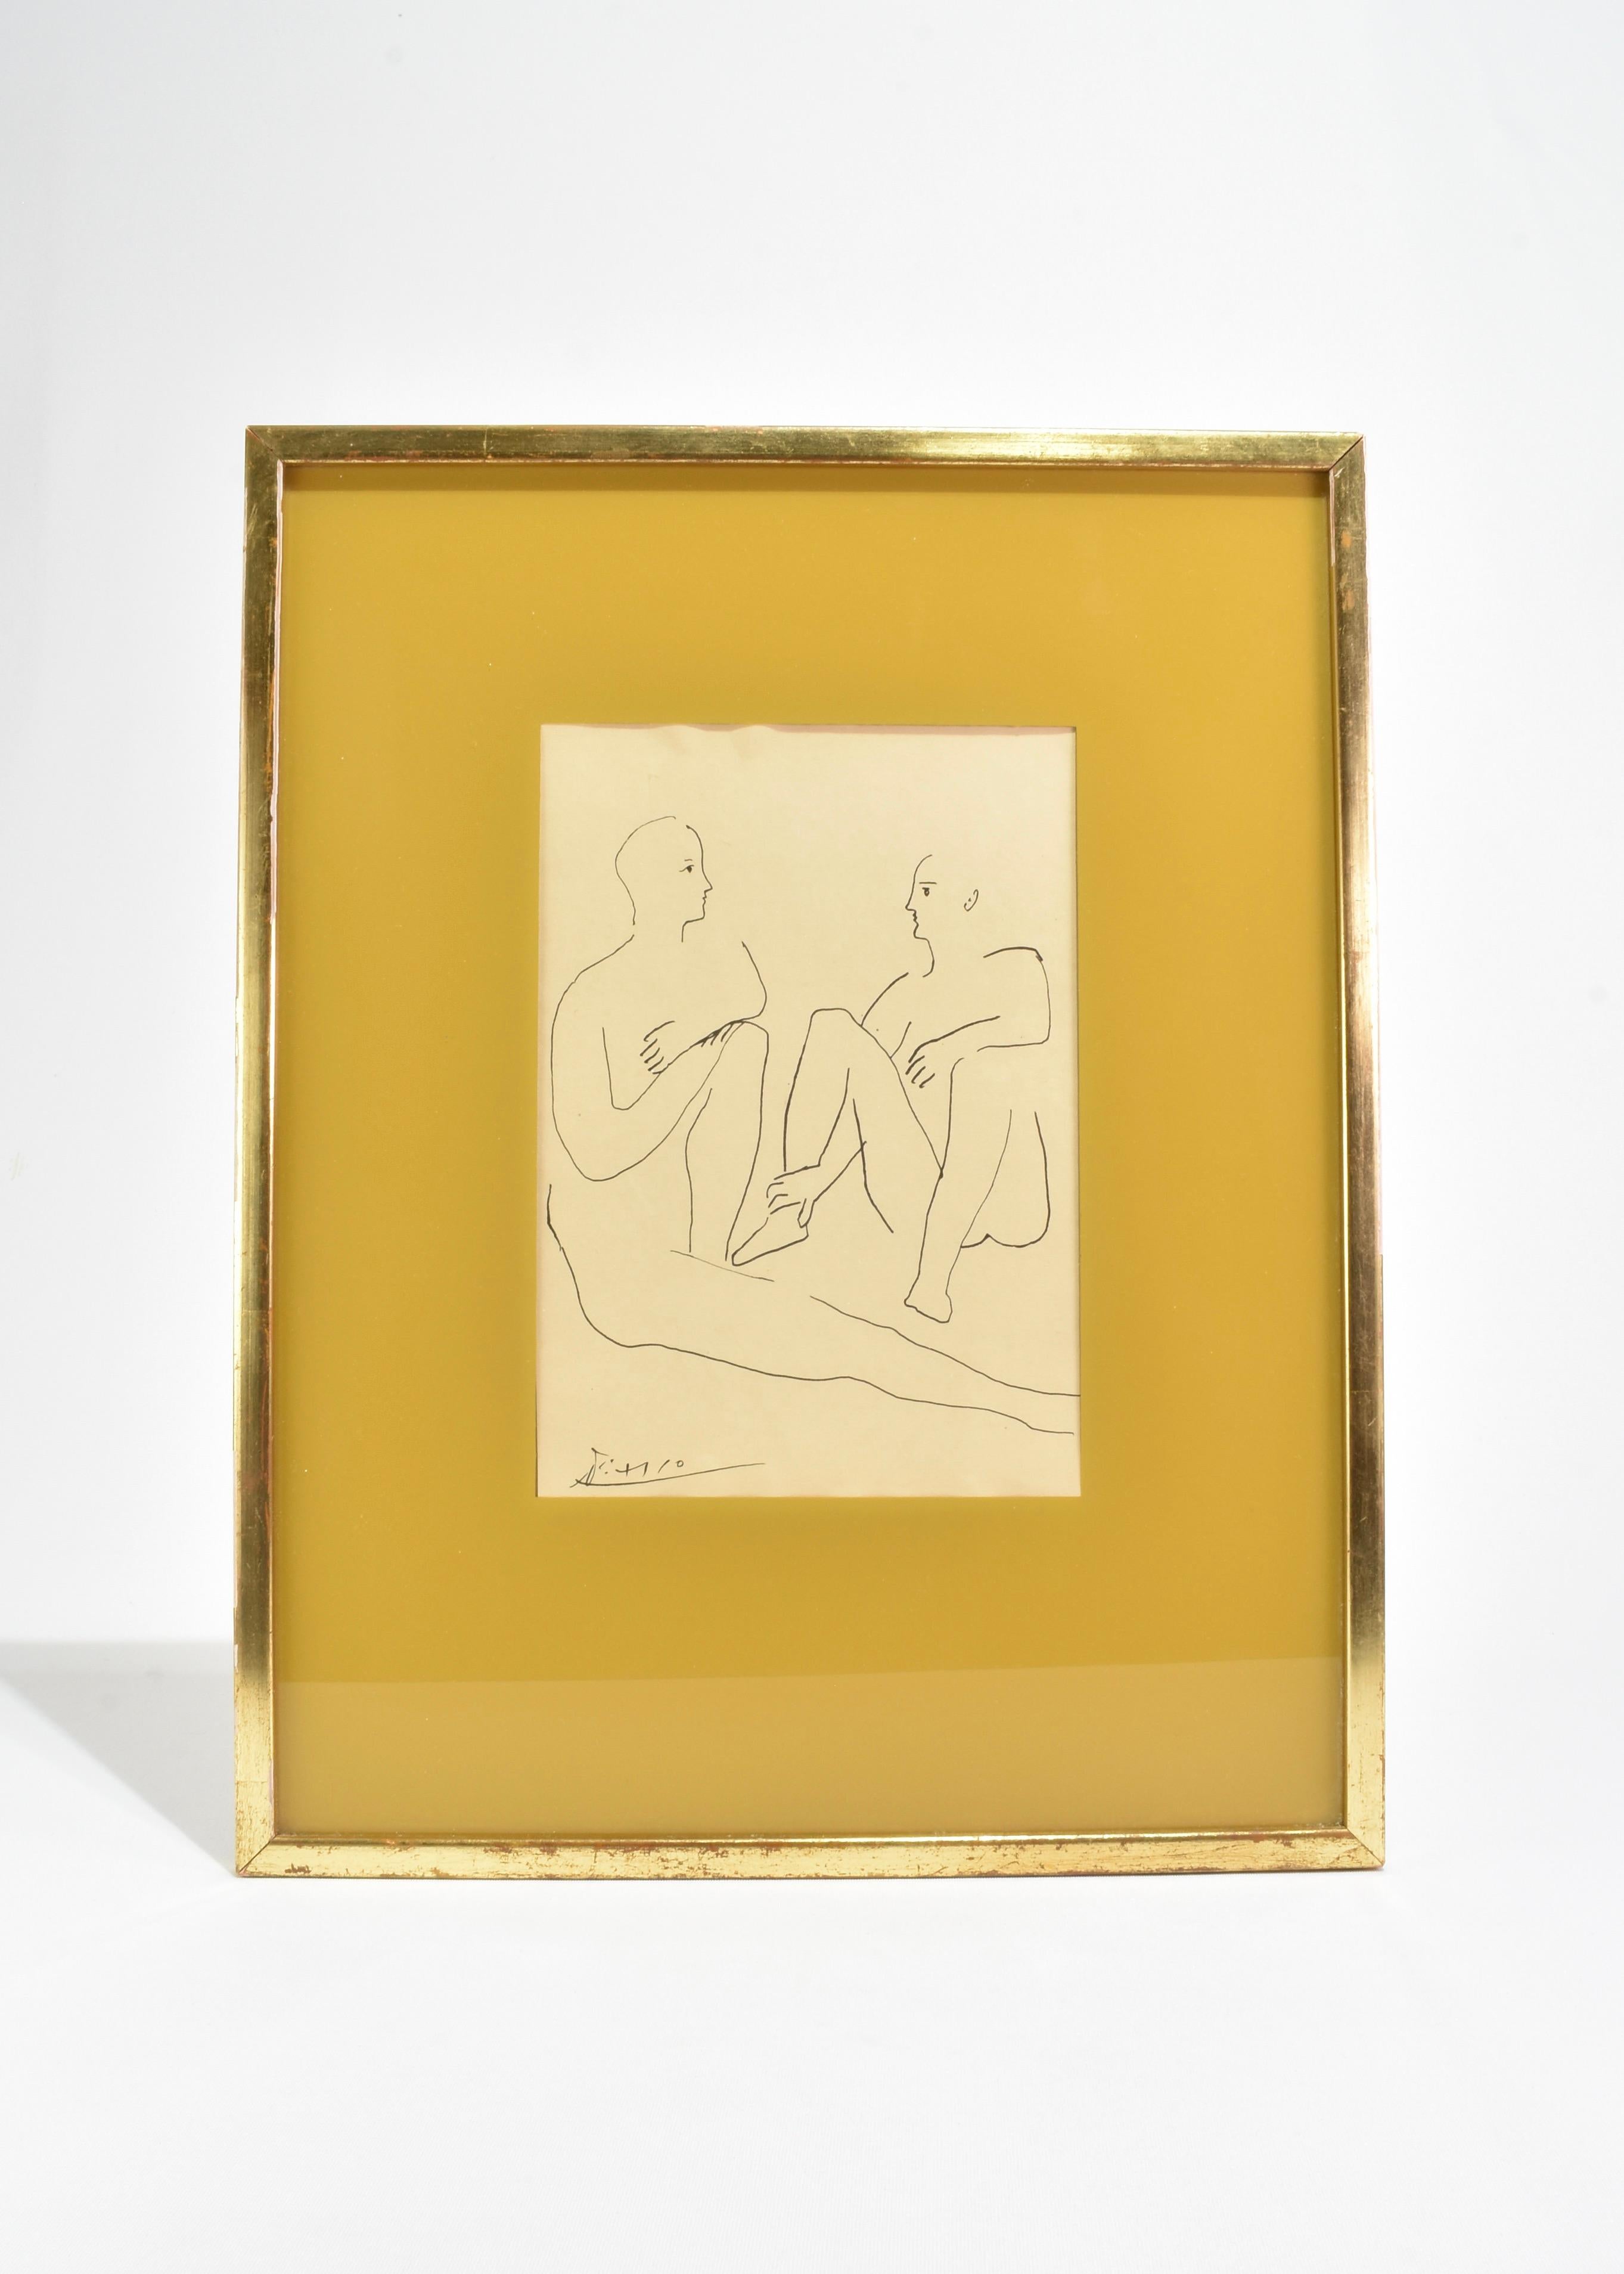 Rare, vintage artwork featuring two ballet dancers. Signed on the bottom left, Picasso. Framed in original gilt wood frame with a wire on the back and beautiful light olive colored matte.

Attributed to Picasso. Likely a copper engraving taken